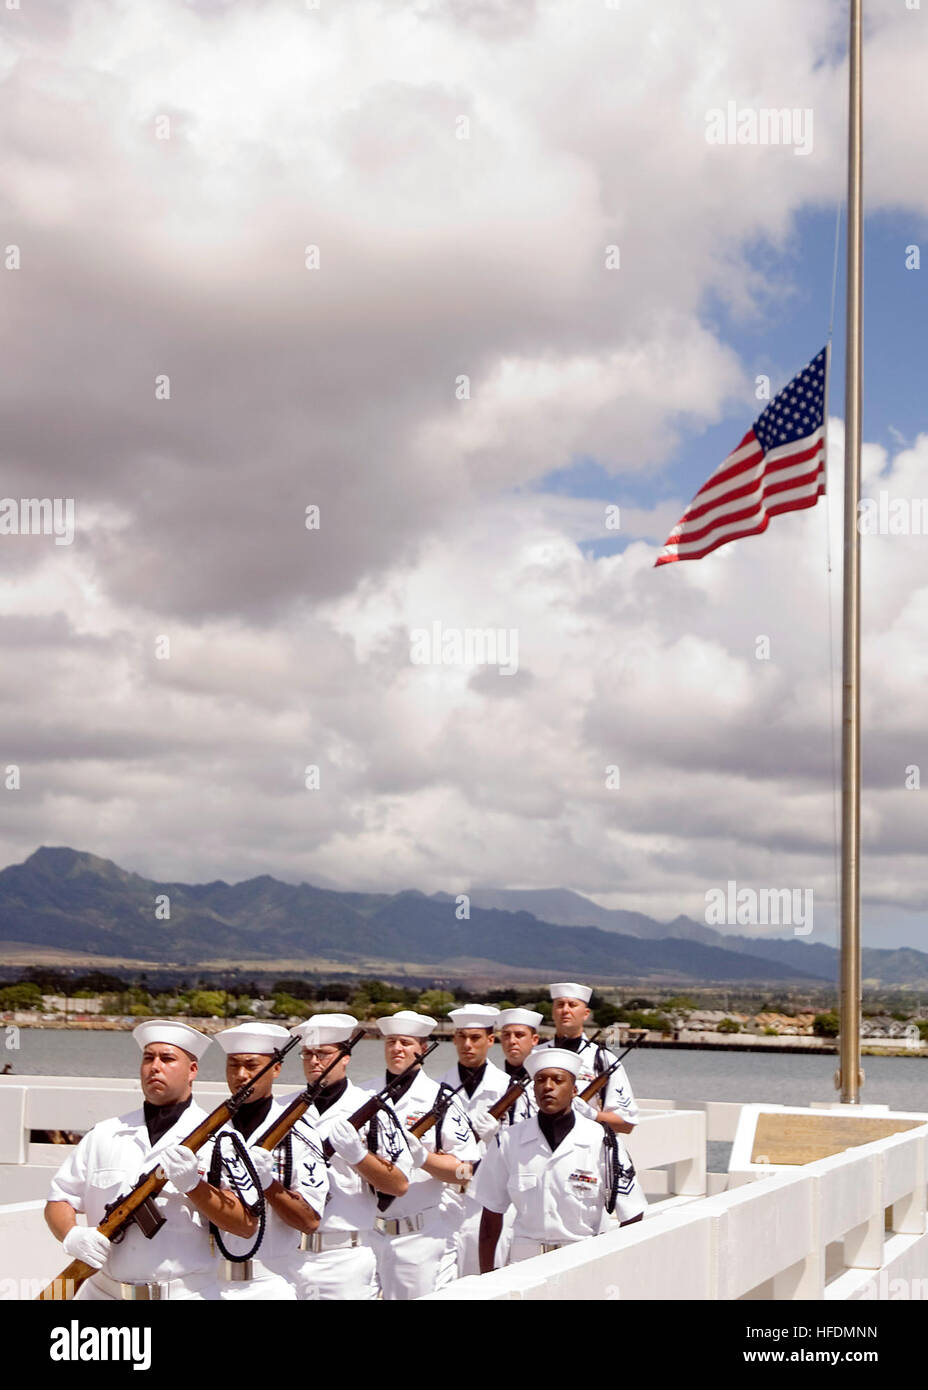 Members of the Navy ceremonial guards post after an interment ceremony at the USS Utah Memorial on Ford Island at Naval Station Pearl Harbor. The ceremony was held to honor Petty Officer First Class Jimmy Oberto, a crewmember of the Florida-class dreadnaught battleship USS Utah during the Pearl Harbor attack. Ashes spread on Ford Island 95088 Stock Photo